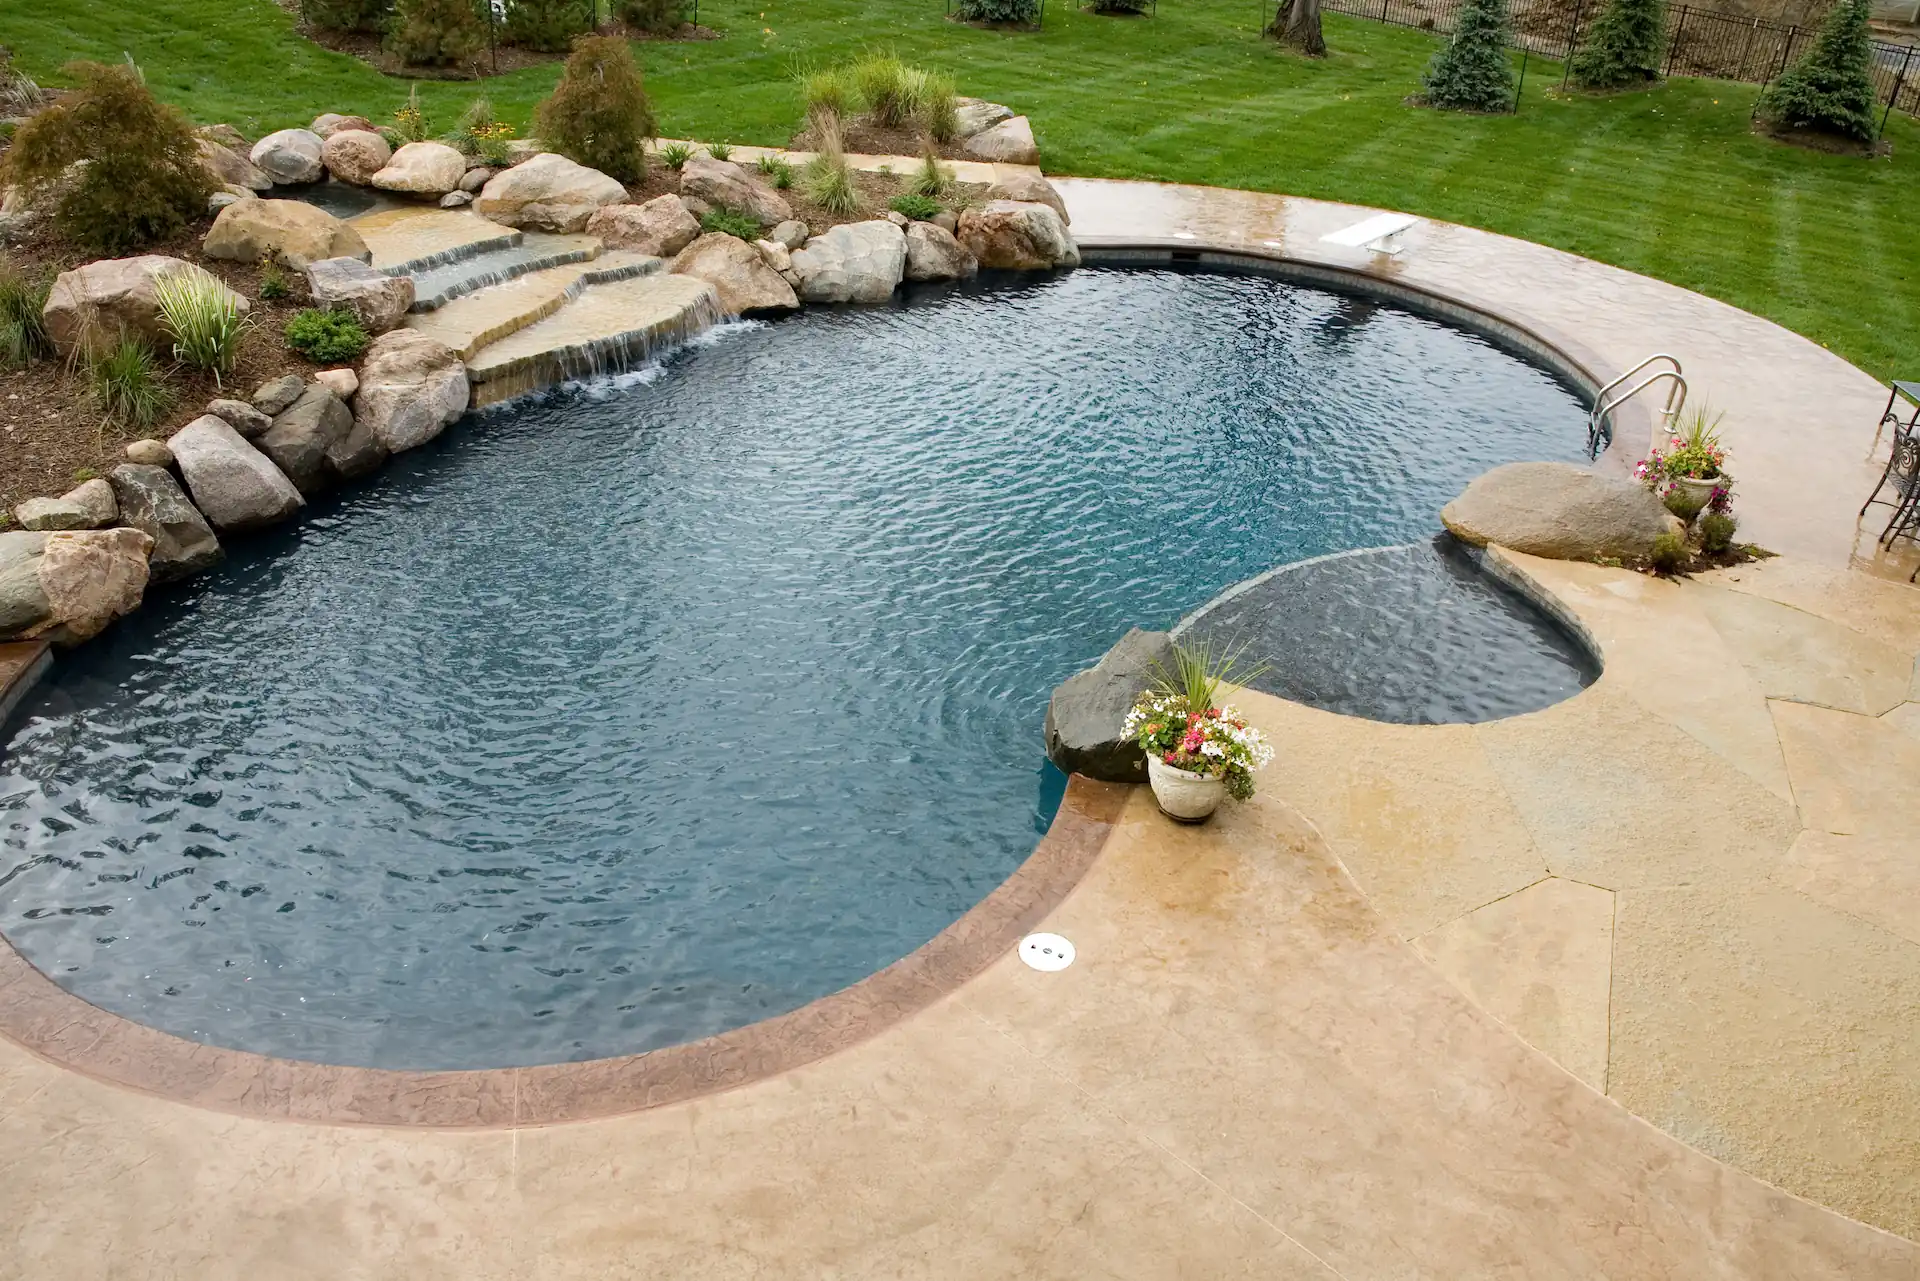 Wide, aerial shot of a kidney-shaped inground pool with a jade-colored liner decorated with river rocks. Naturalistic colors and features like the kind pictured here are among the popular pool design trends for 2023.